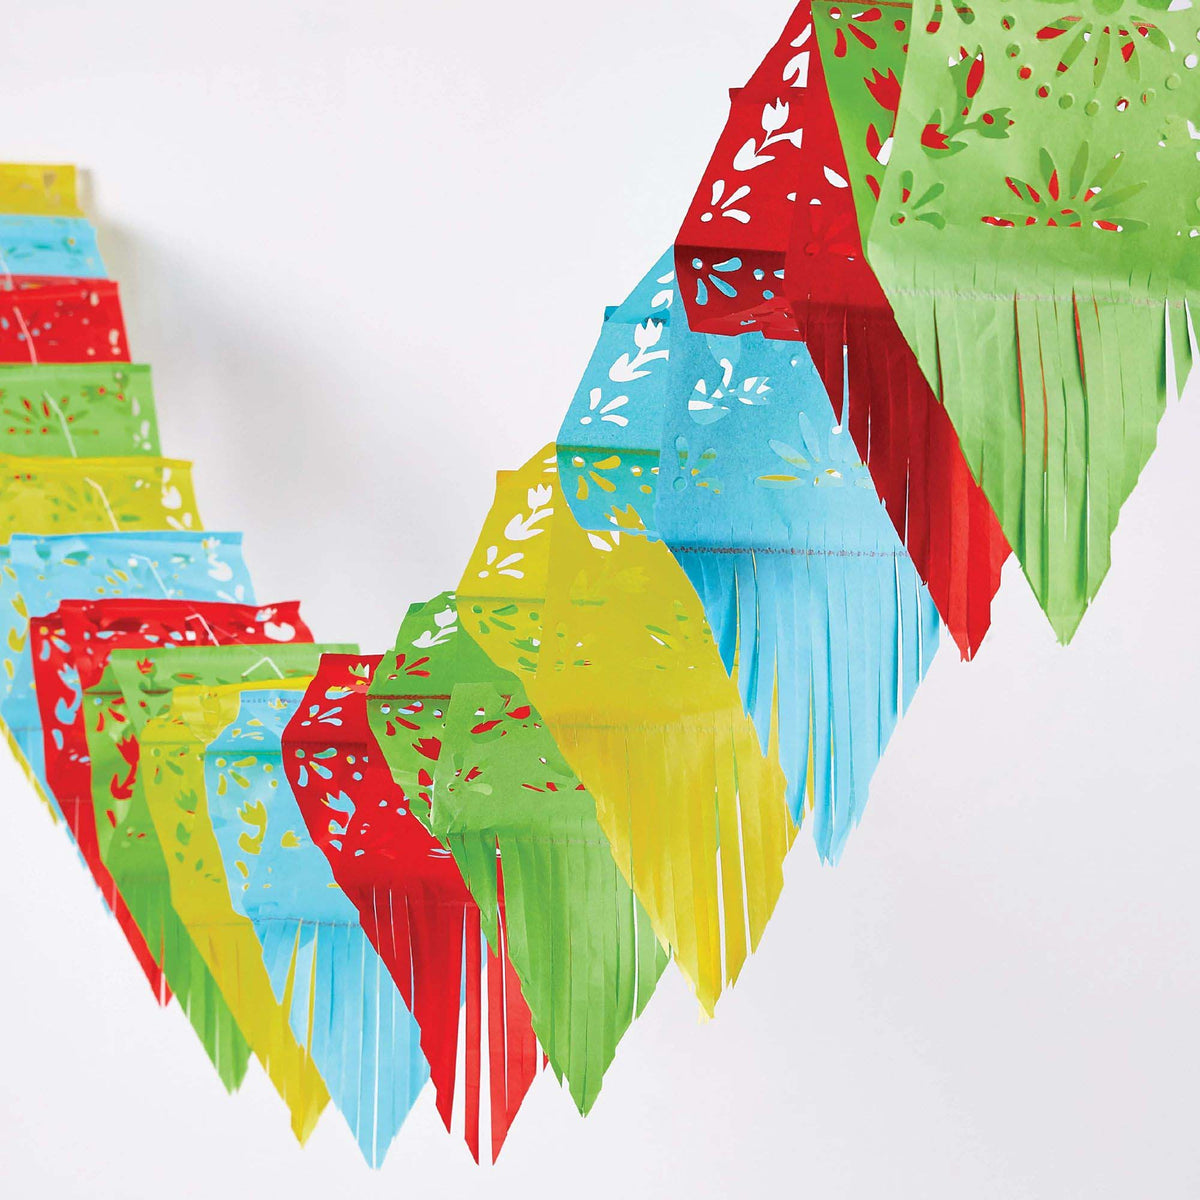 AMSCAN CA Theme Party Fiesta Hanging Decoration, 12 x 10 Inches, 1 Count